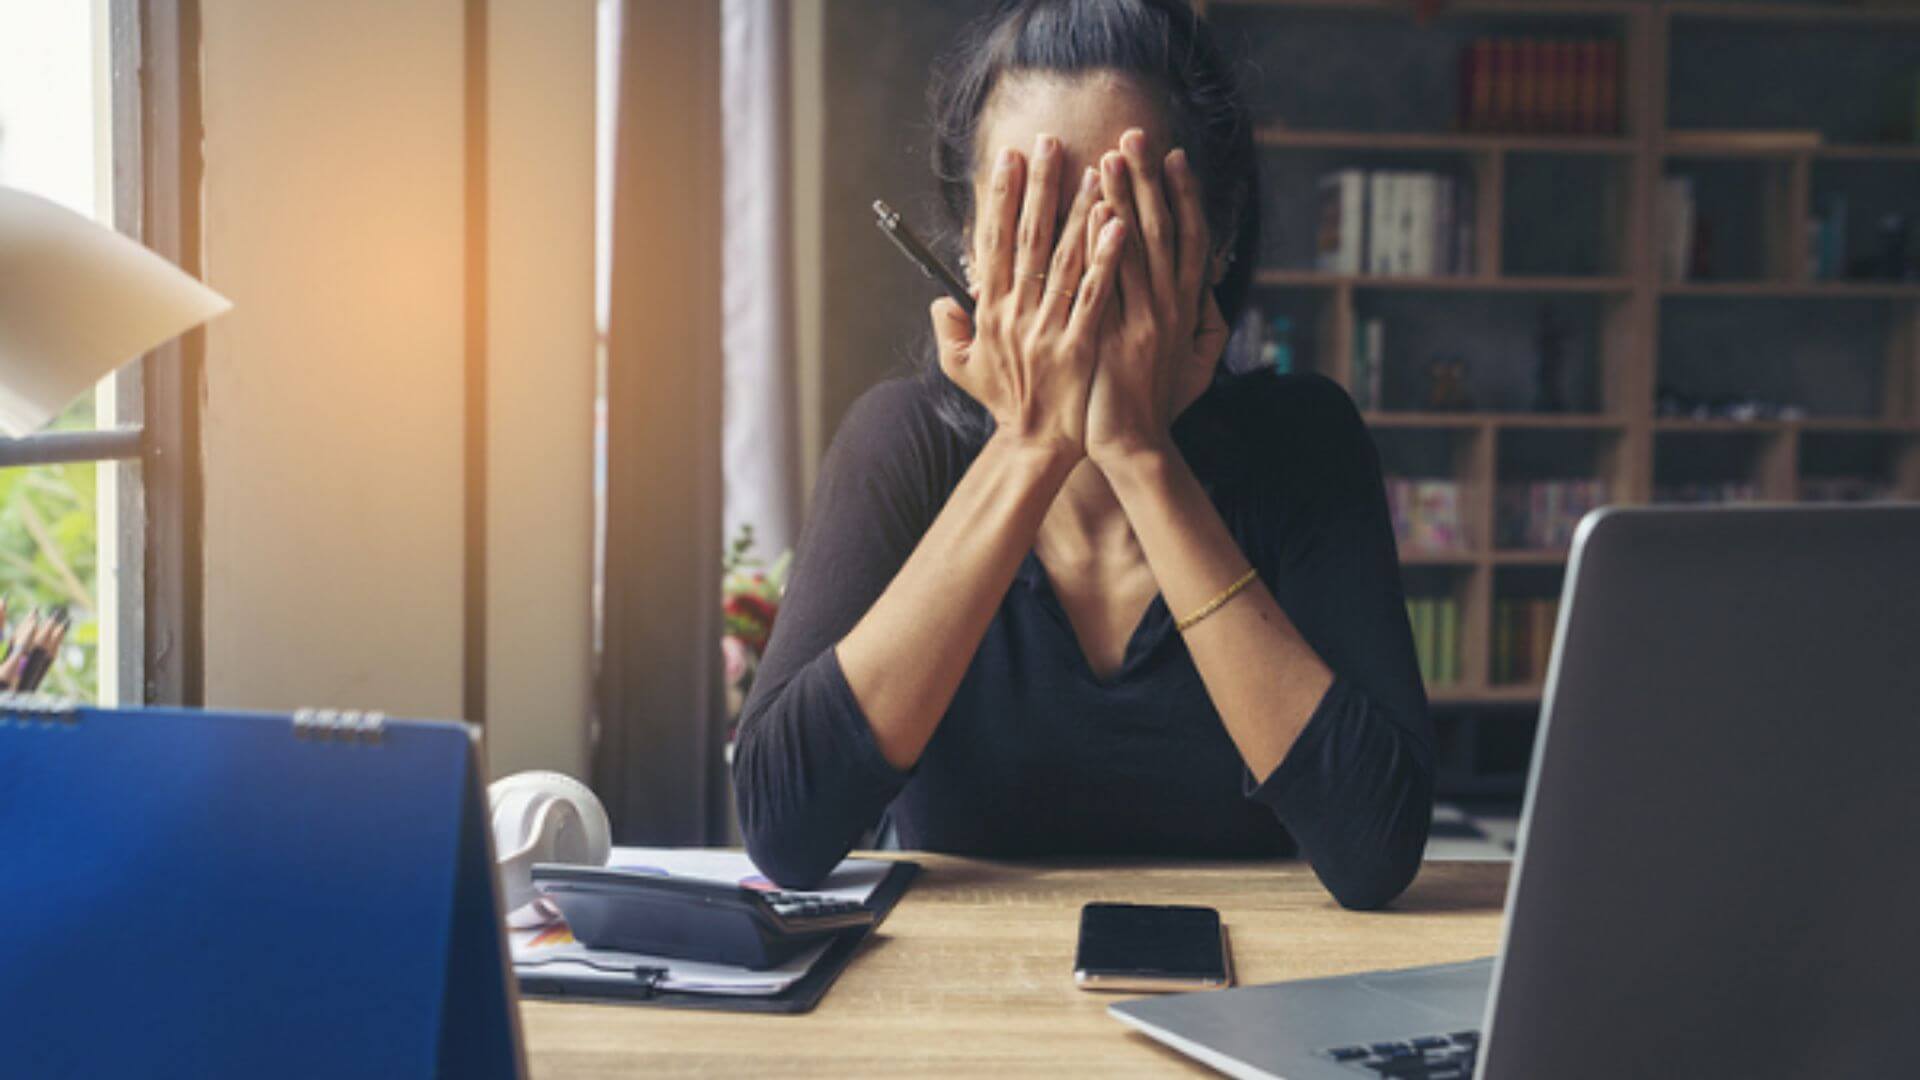 How To Manage Your Workplace Anxiety